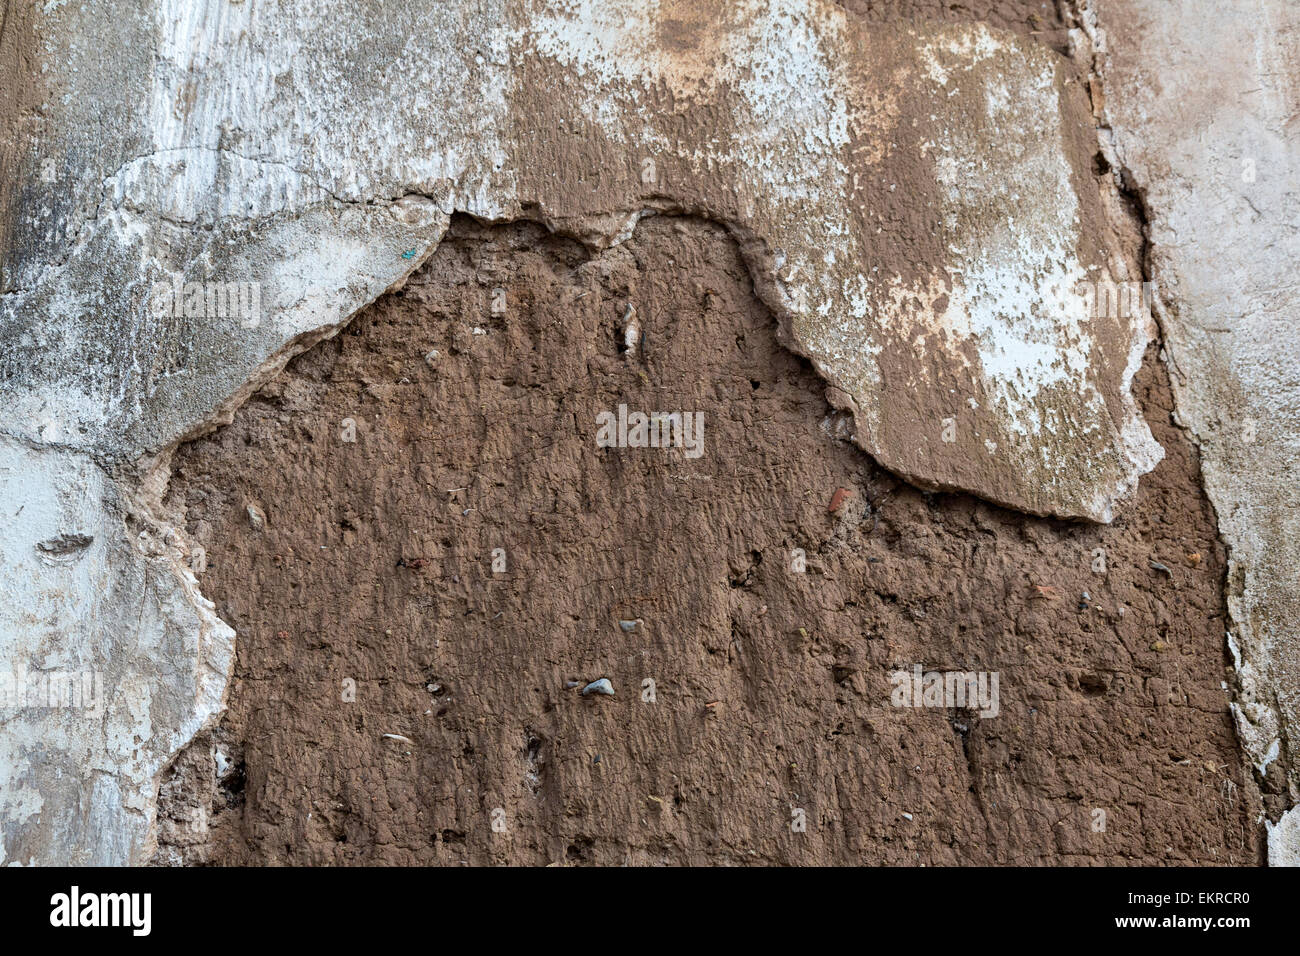 Peru, Cusco.  Falling Plaster Reveals Mud-brick Construction of Houses in Old Residential Areas above the Plaza de Armas. Stock Photo